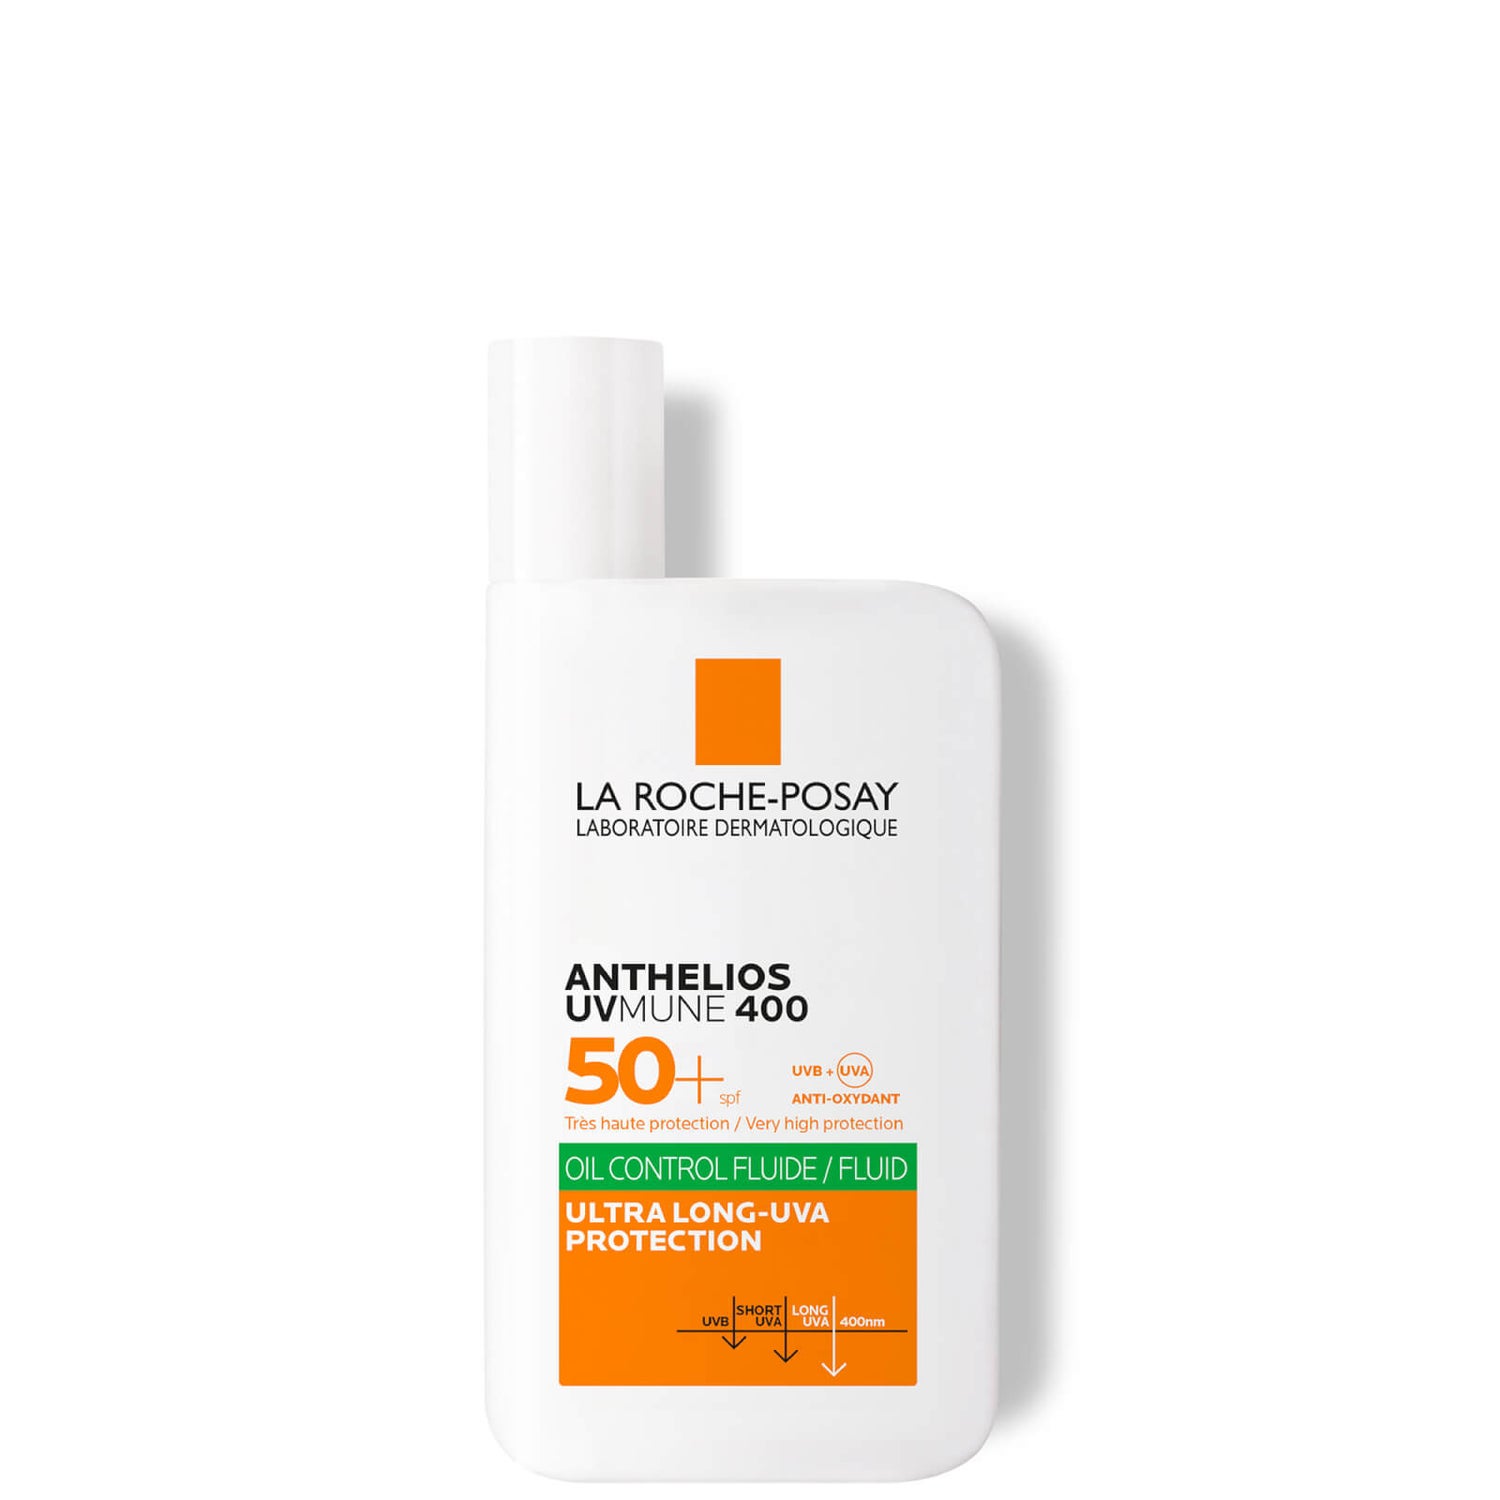 Overskrift Absolut grill La Roche-Posay Anthelios Oil Control Fluid SPF50+ for Oily Blemish-Prone  Skin 50ml | Cult Beauty